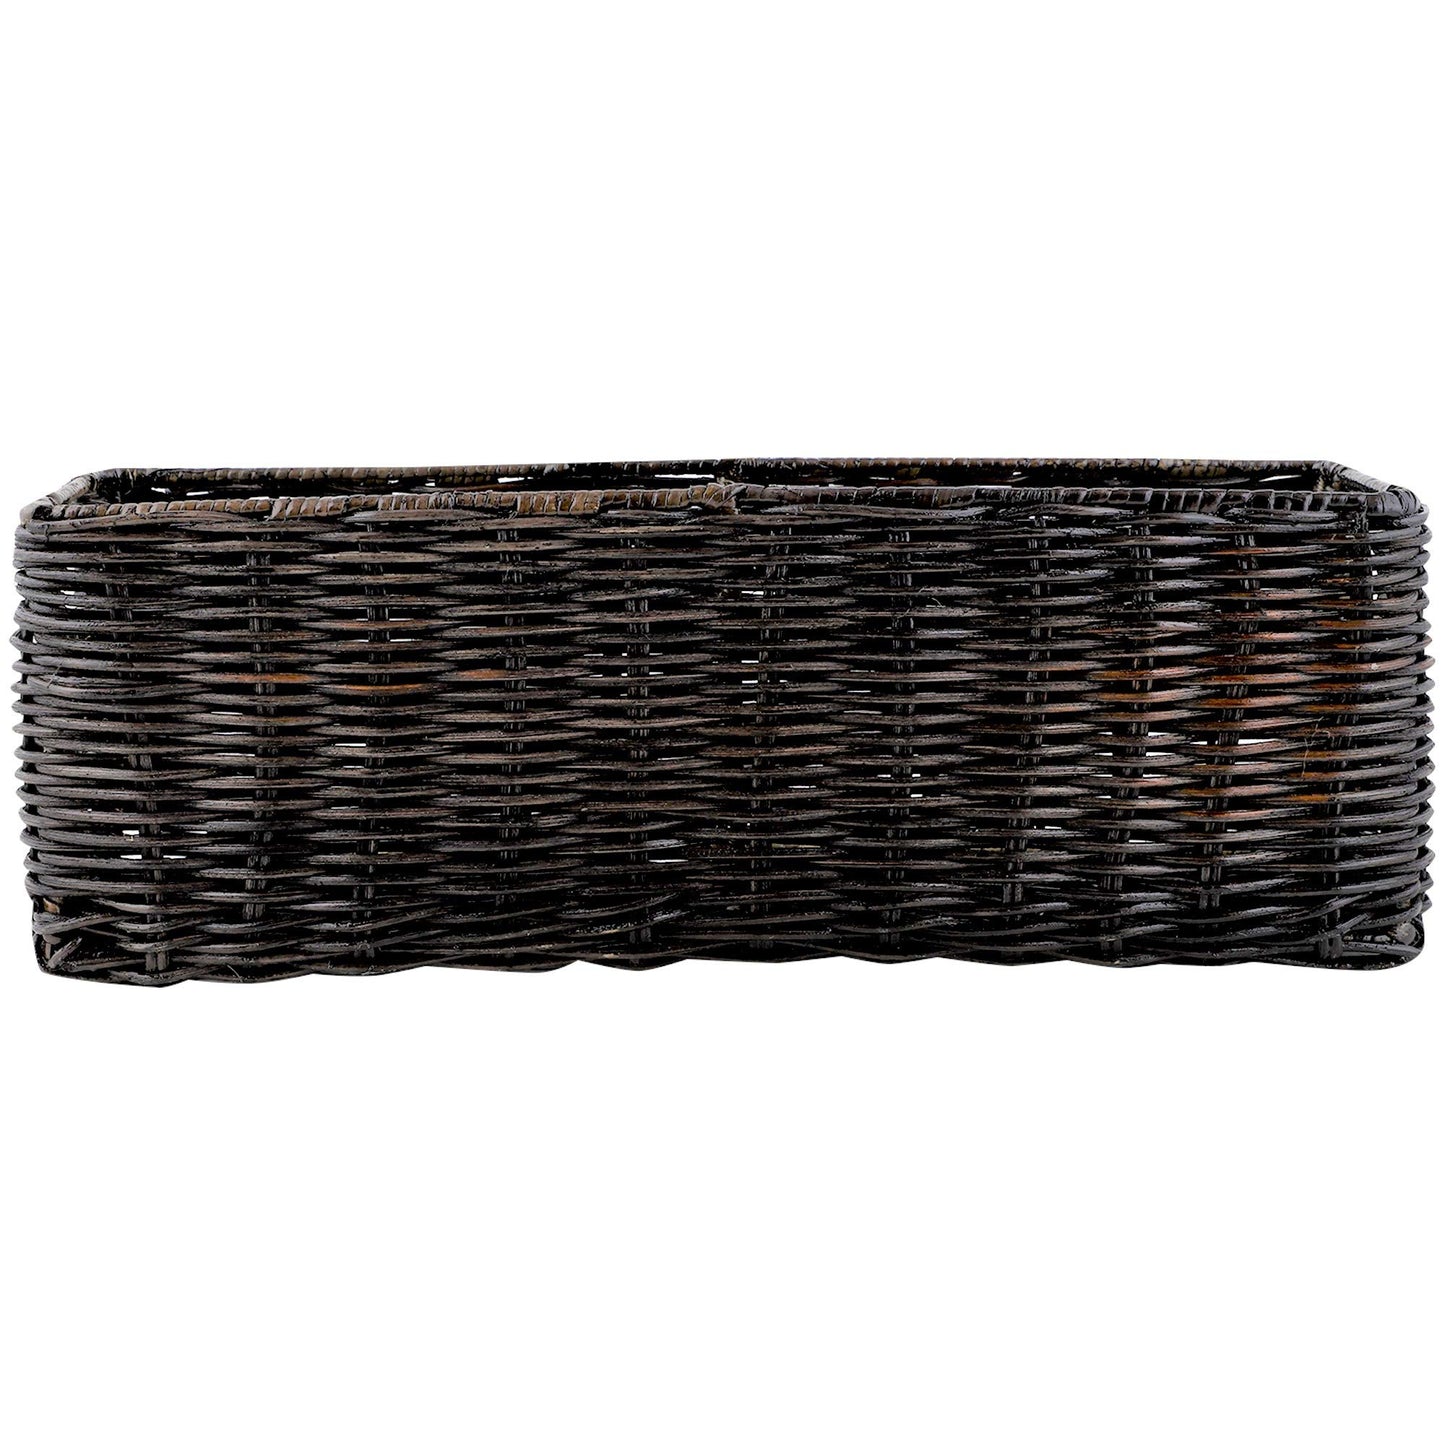 AKWAY Wicker Bathroom Vanity Tray for Toilet Paper and Soap, Kitchen Counter Top Storage Shelf Coffee Table Decorative Tray Cosmetic Organizer Display Holder (11 L x 4.5 W x 4.5 H, Antique Black) - Akway